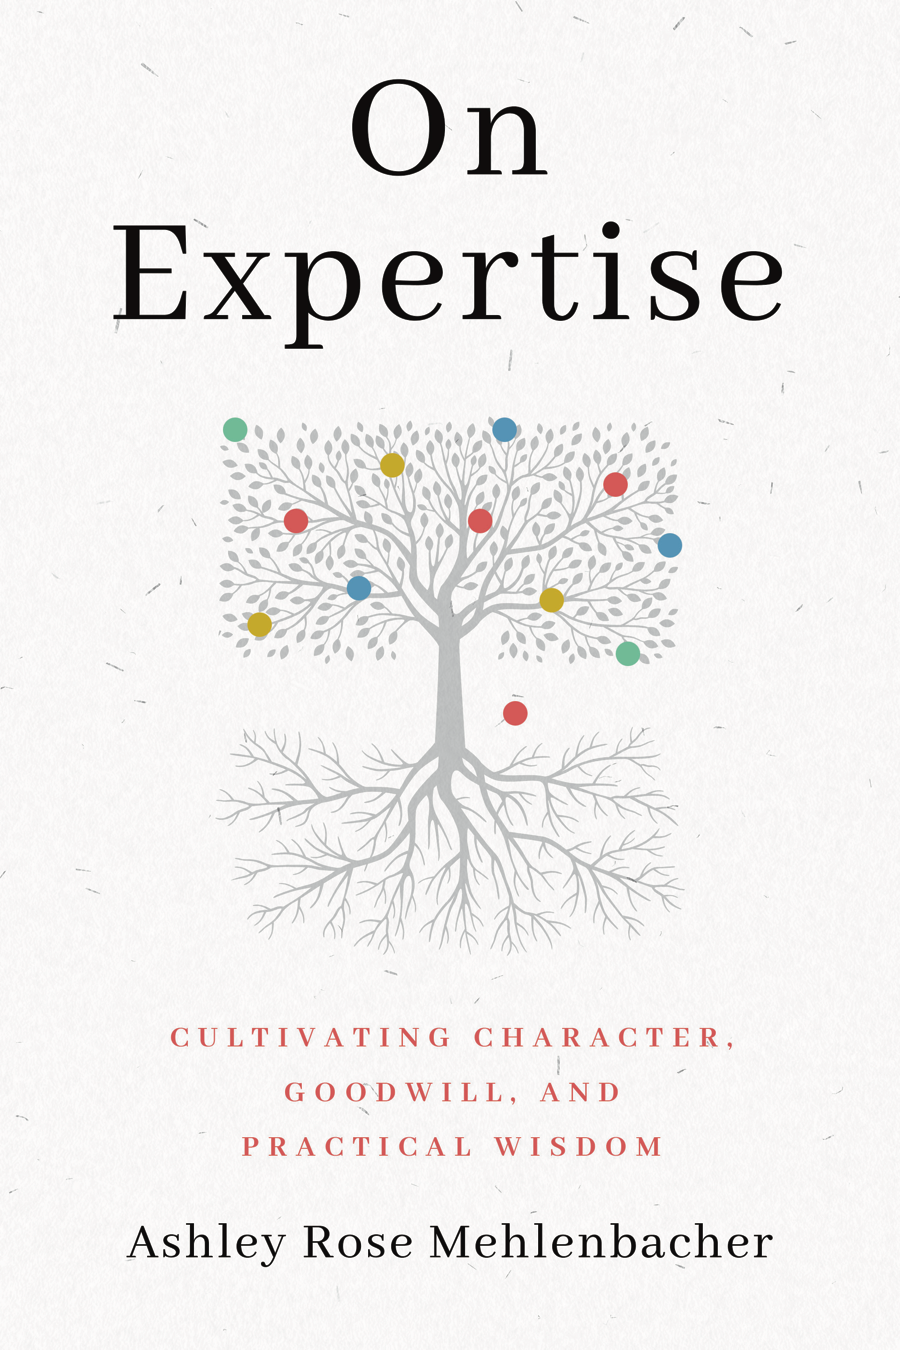 Cover image for On Expertise: Cultivating Character, Goodwill, and Practical Wisdom By Ashley Rose Mehlenbacher.